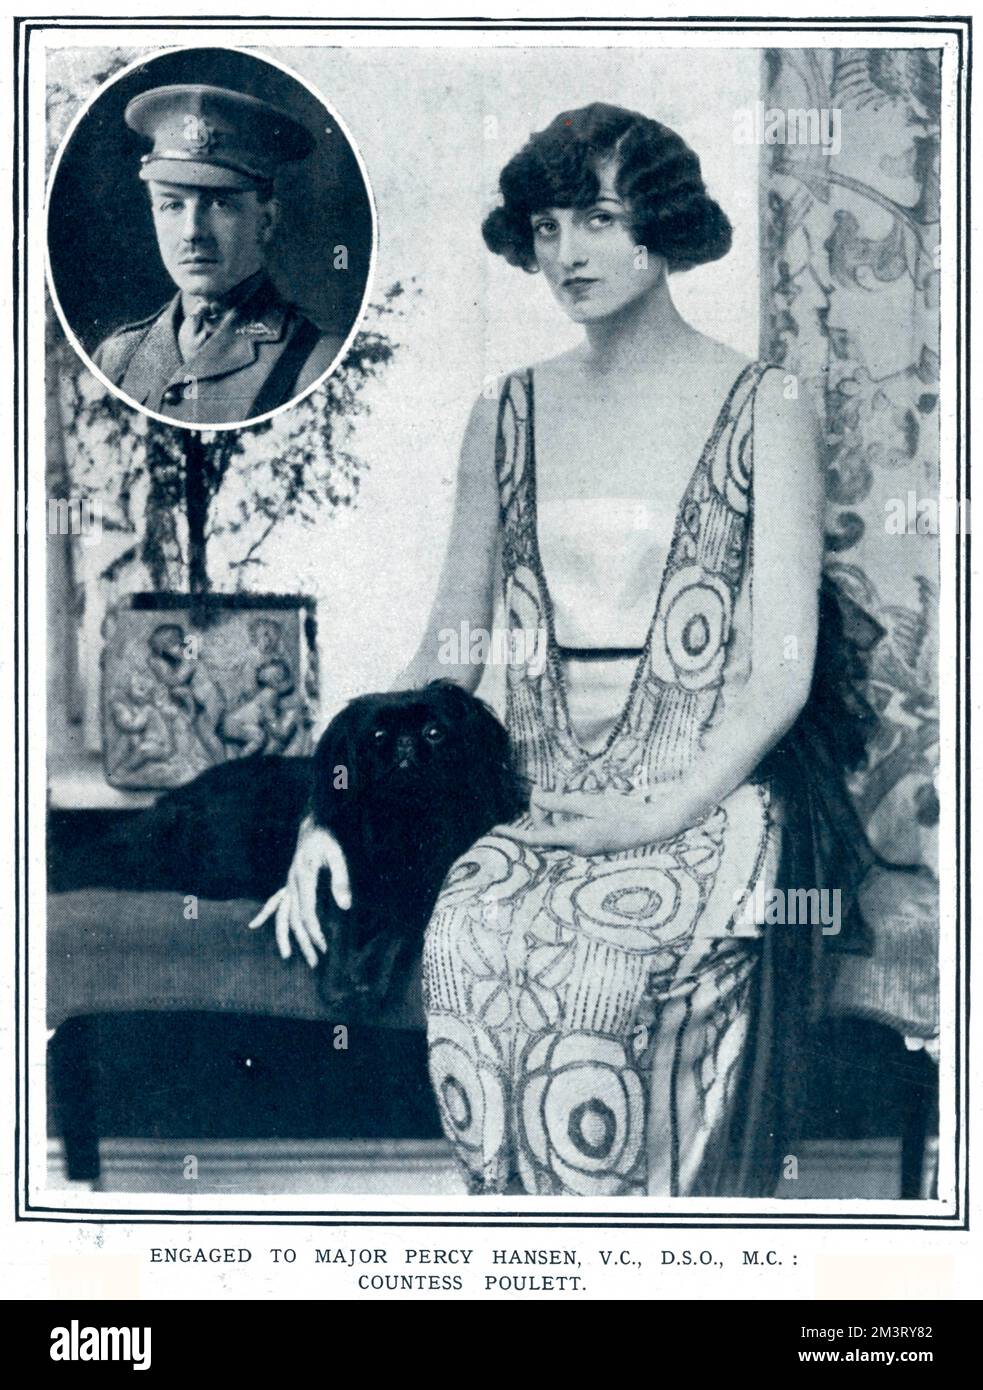 Countess Poulett, formerly stage star Miss Sylvia Storey, photographed after the announcement of her engagement to Major Percy Hansen. Storey was formerly married to the seventh Earl Poulett in 1908 with whom she had two children, although he died in 1918 of Spanish influenza. The marriage between Countess Poulett and Major Hansen never took place, possibly because the financial benefits she recieved on account of her first husband's will depended on her being unmarried.      Date: 1921 Stock Photo